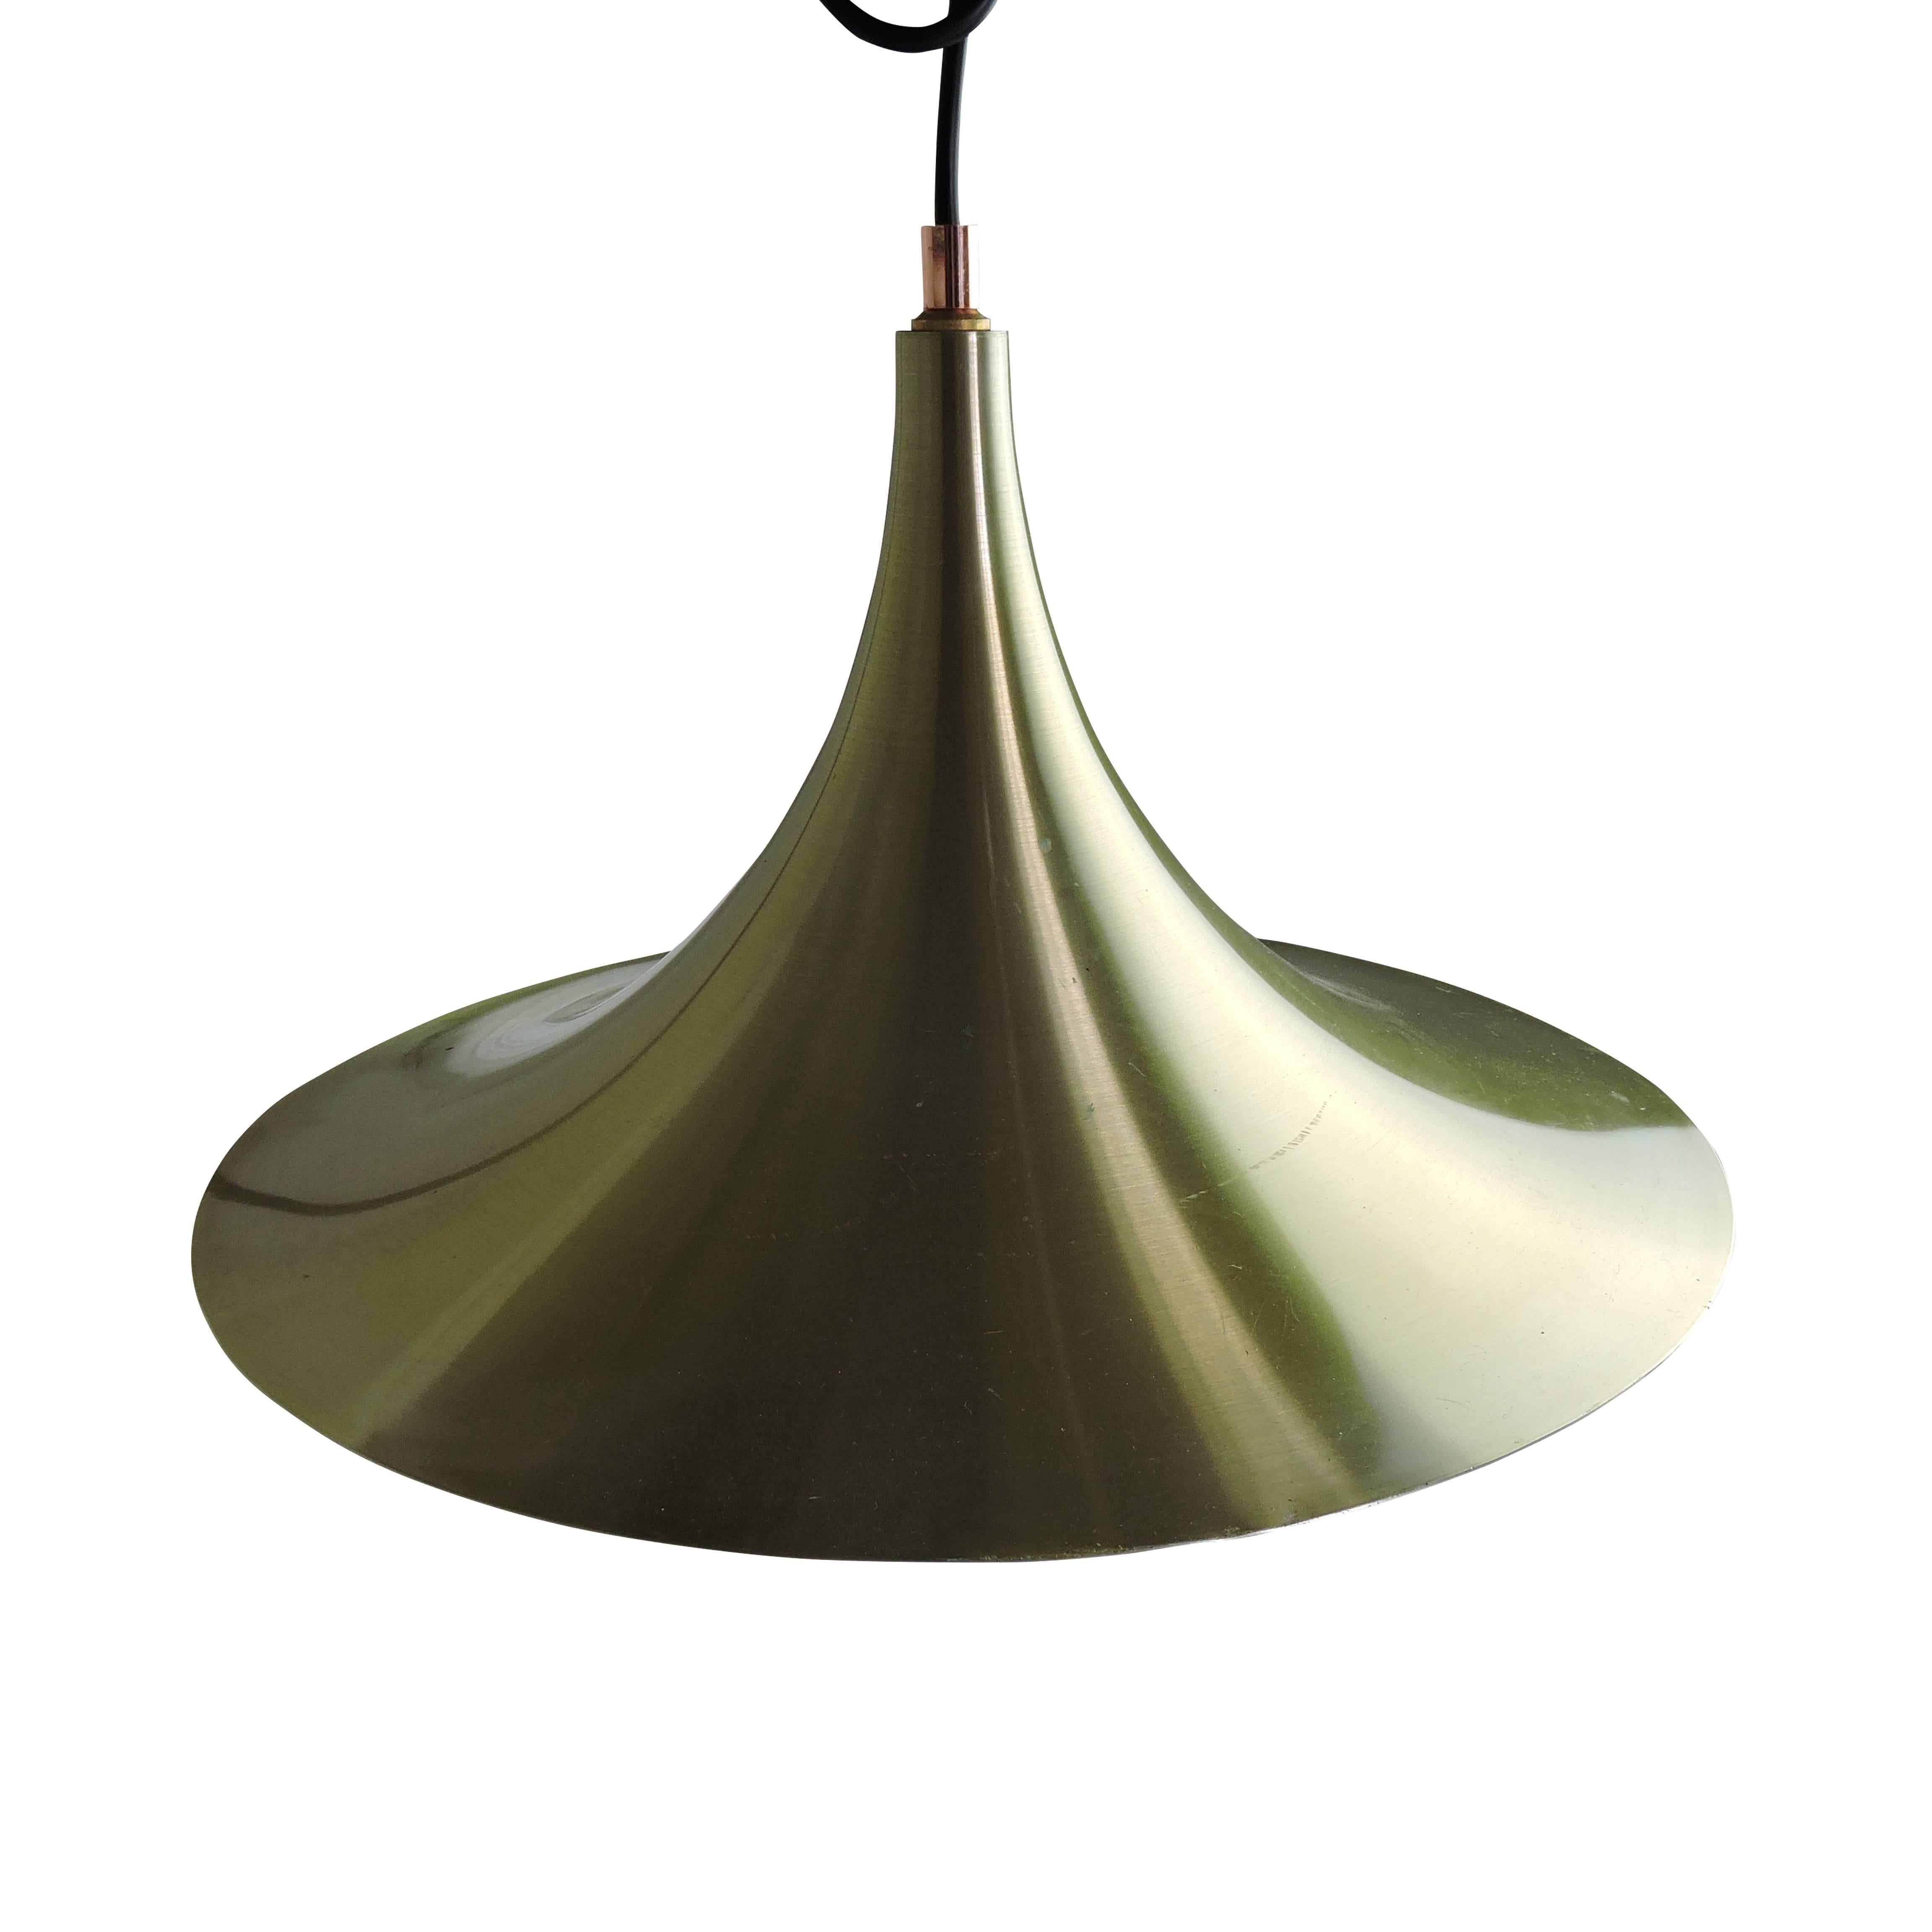 This Danish semi model pendant light was made by AKA and is labeled by the maker. The light has a brushed bronze exterior.
 